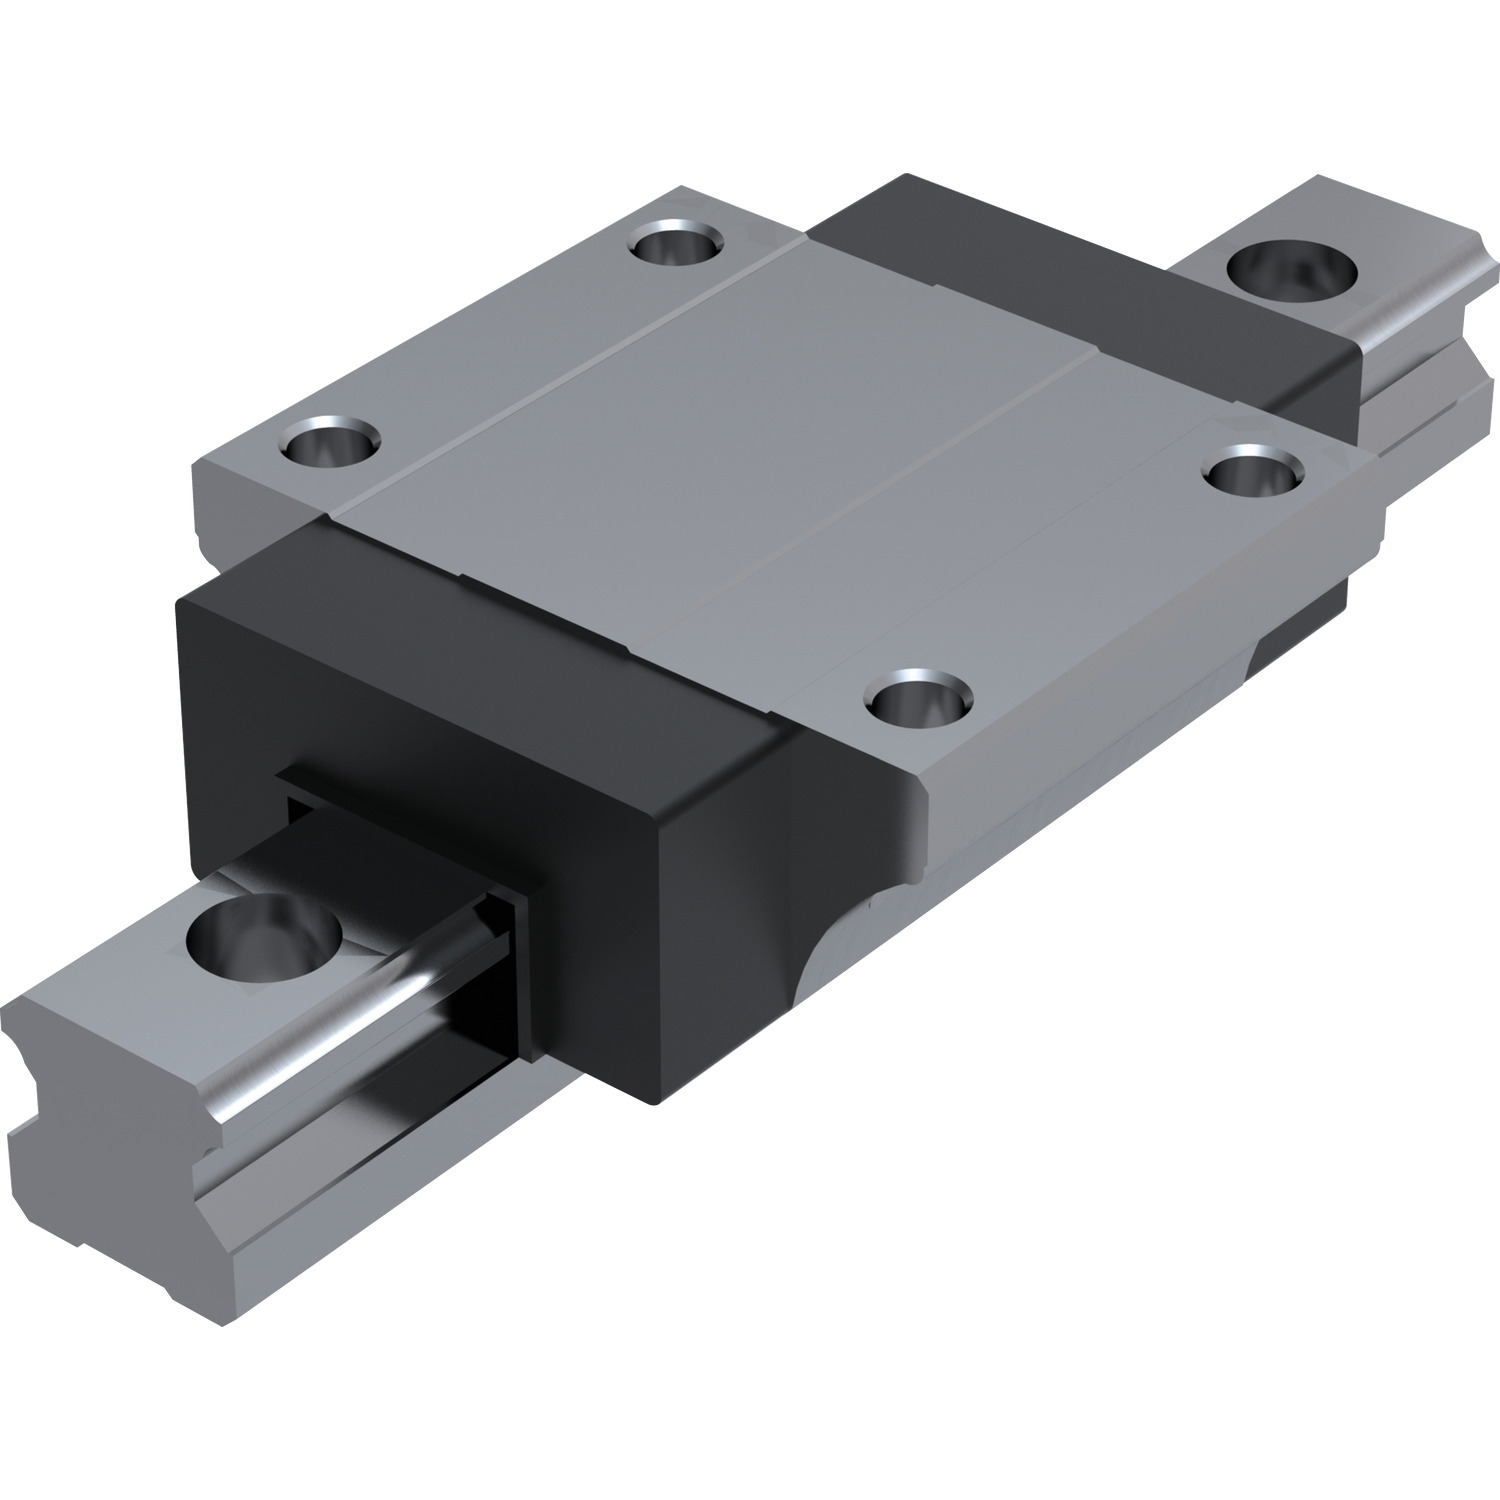 Linear Guideways Our most popular Linear Guide Systems with either flanged or un-flanged carriages (L1016.F or L1016.U). Width sizes 15, 20, 25, 30, 35, 45 and 55mm. Lengths up to 4 metres and rear-fixing rails also stocked (L1016.RF). Ultra-low profile carriages also available (L1016.UL).